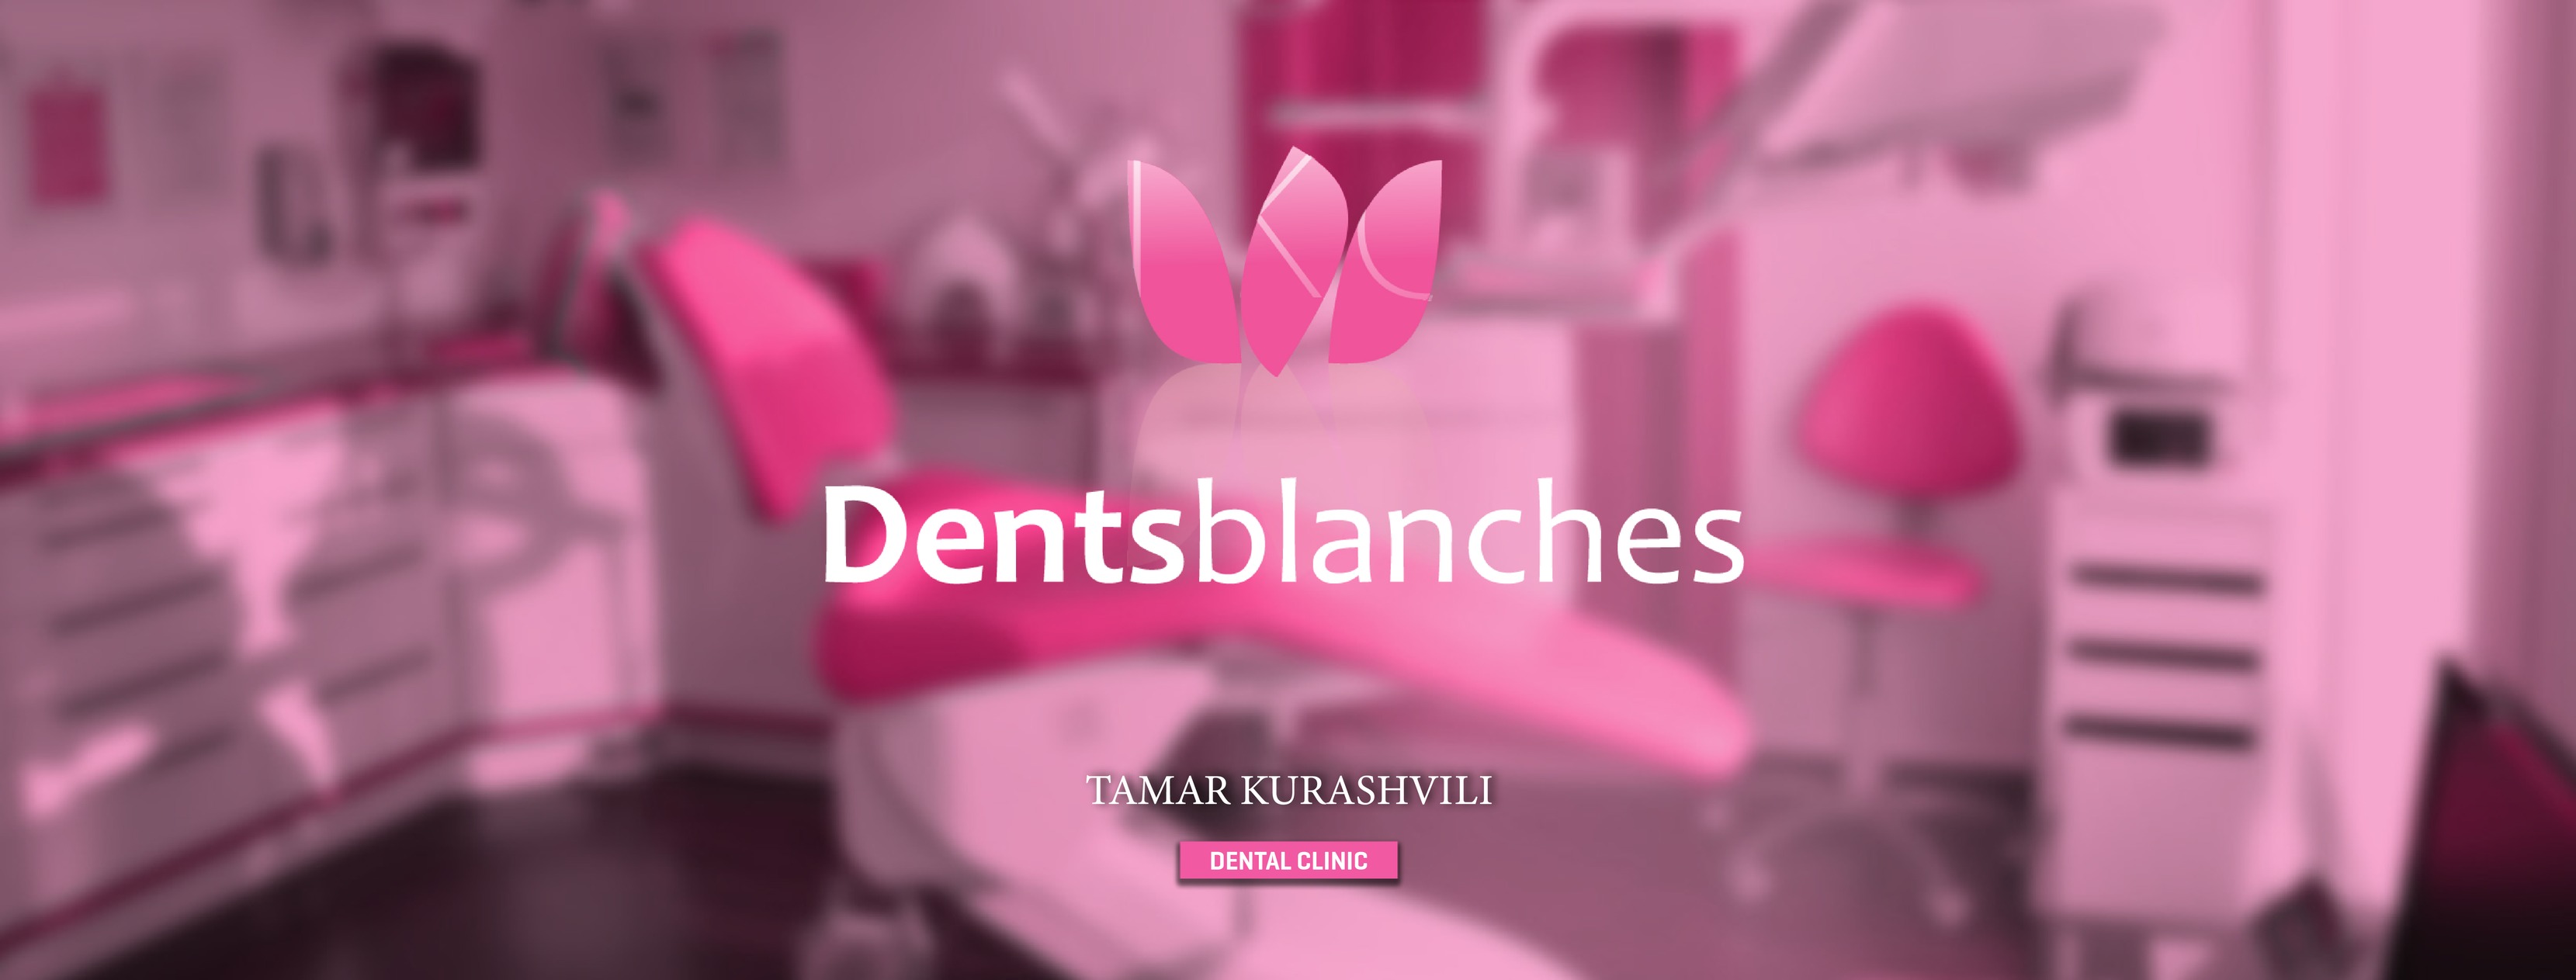 why "Dentsblanches"?